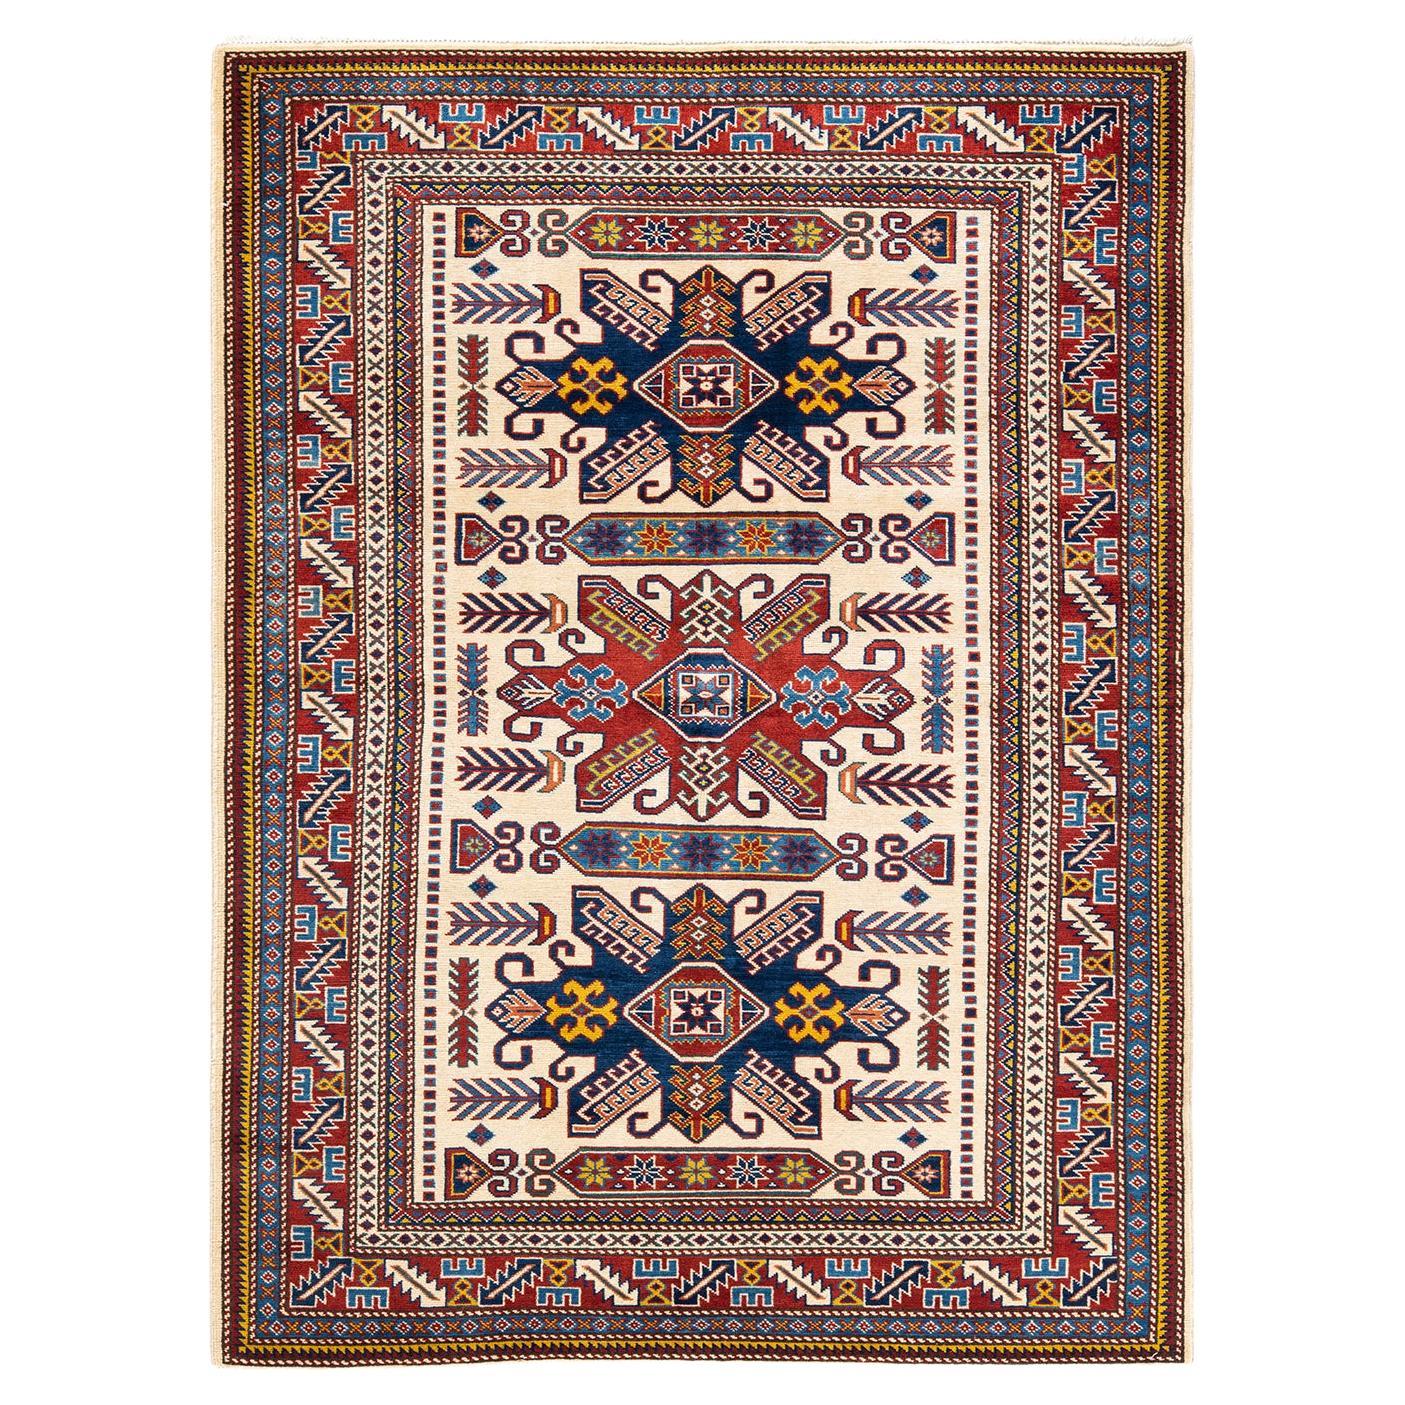 One-of-a-kind Hand Knotted Wool Tribal Ivory Area Rug